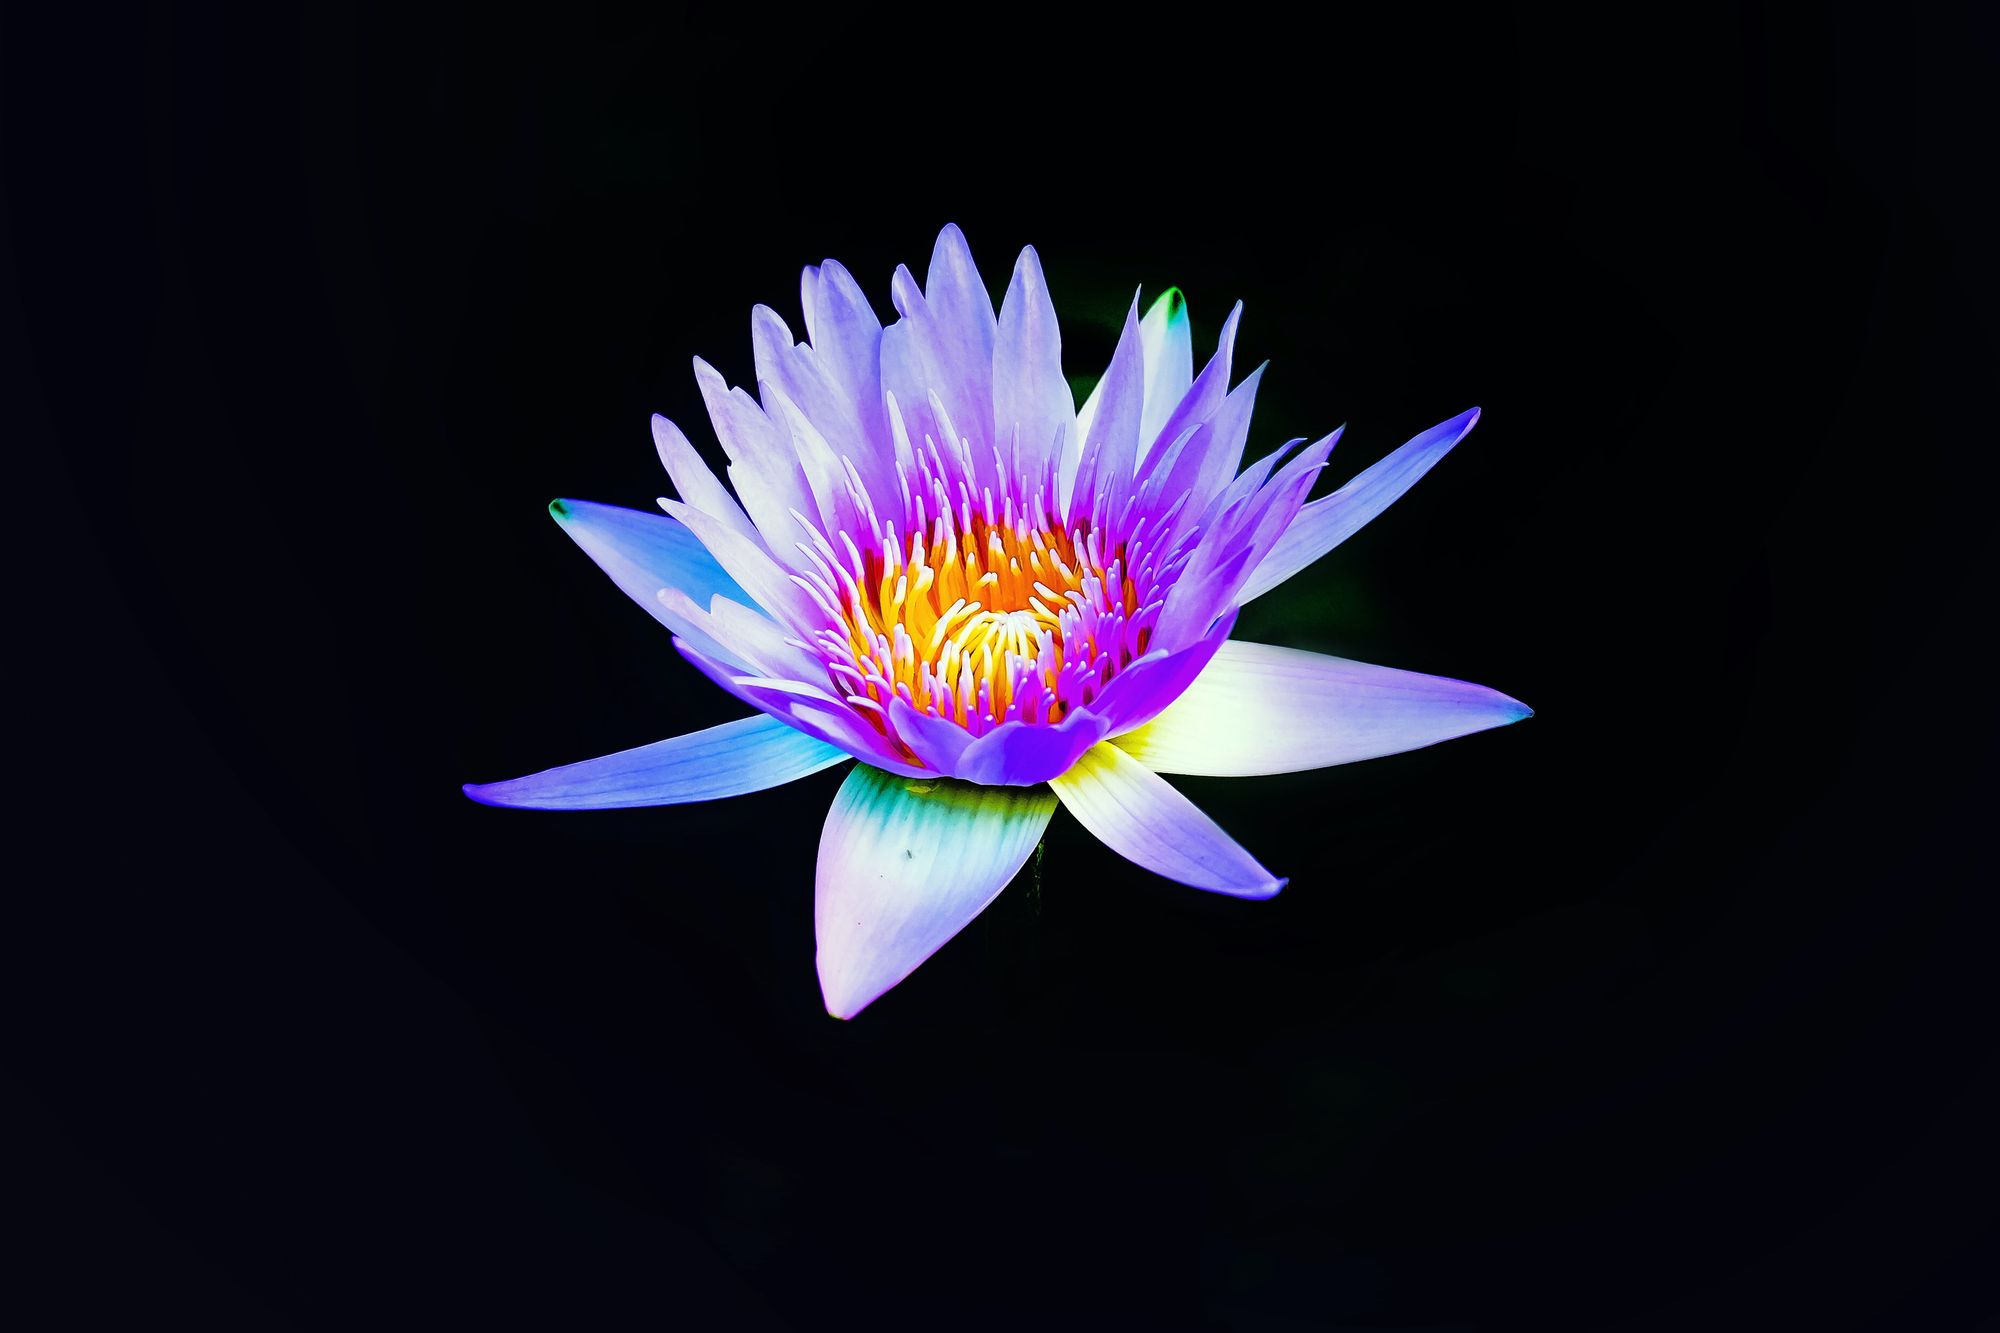 The lotus flower: a symbol of renewal and refreshing